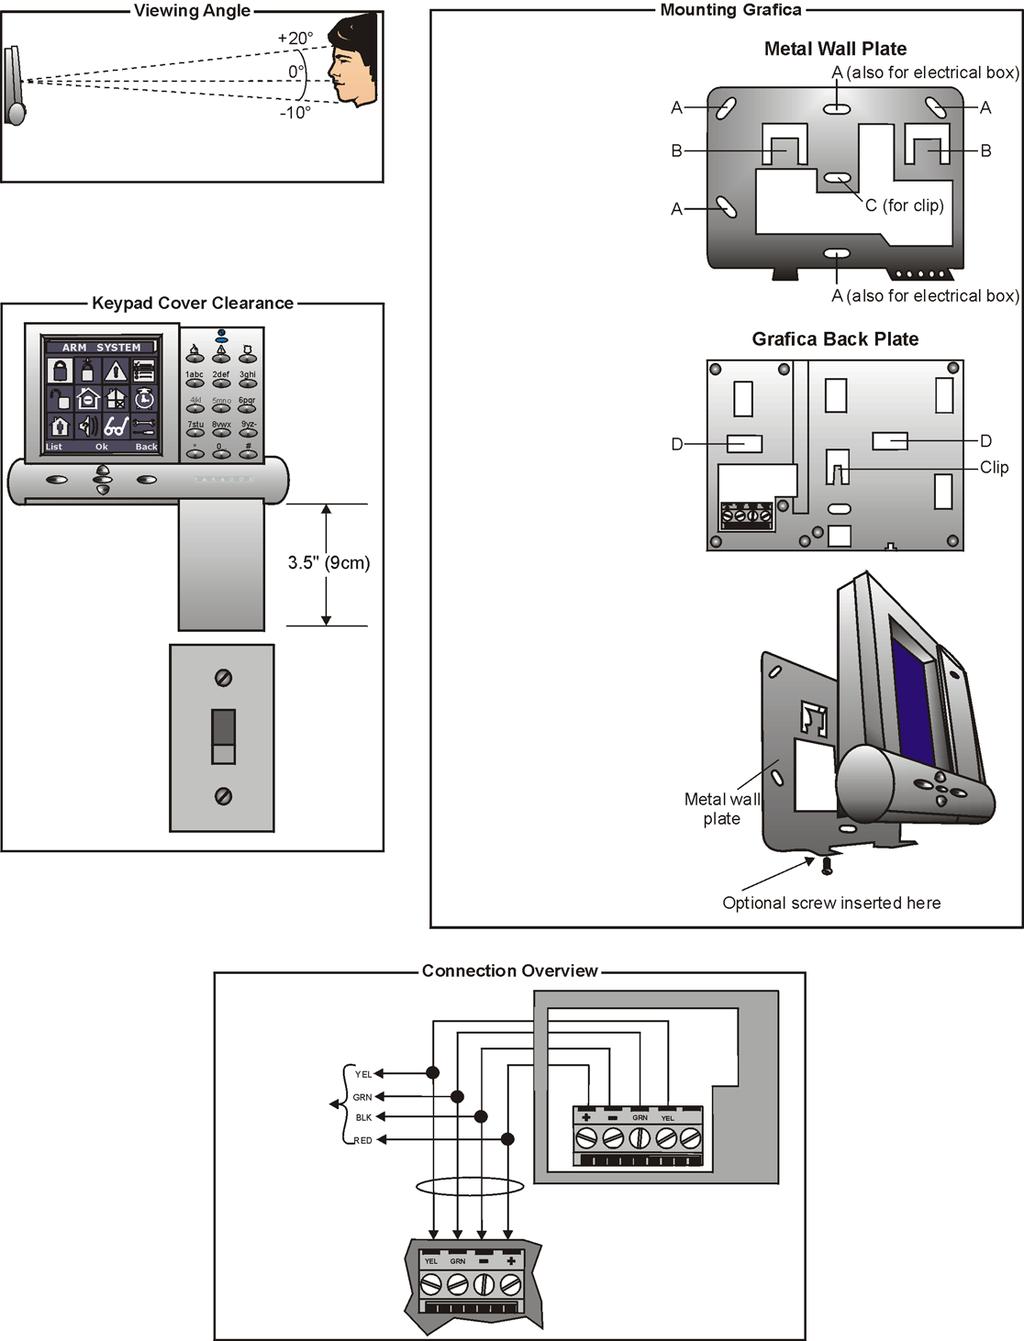 Grafica Graphic LCD Keypad Module (DNE-K07) Please Note: The Grafica keypad is best viewed at an angle between 20 and -10. Mounting the Metal Wall Plate 1) Place the wall plate to desired position.